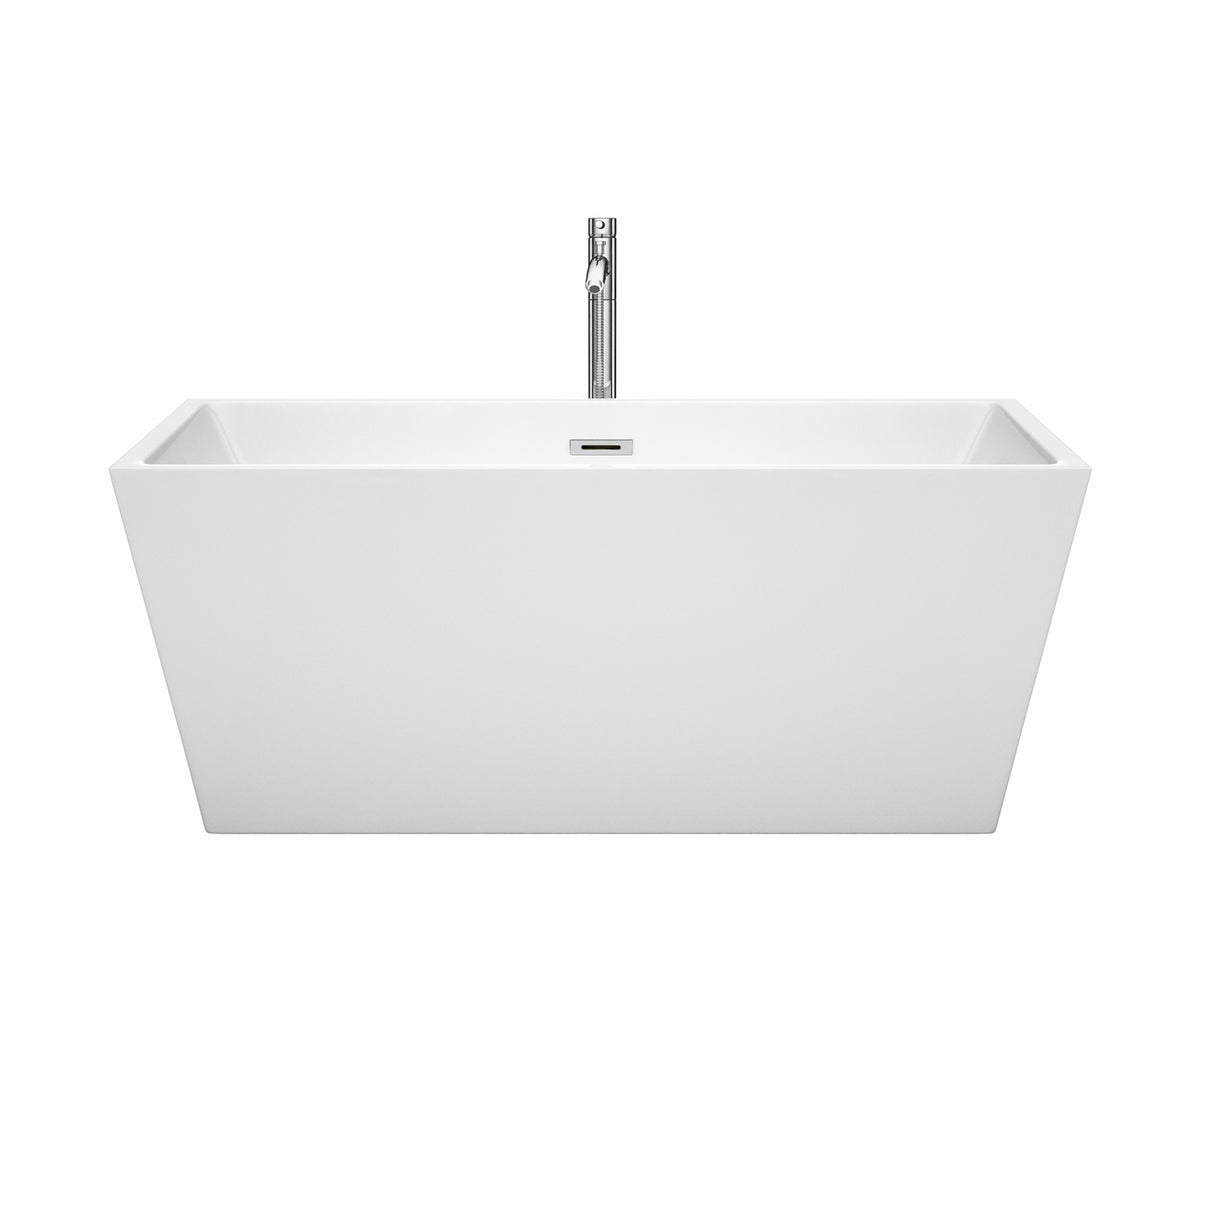 Sara 59 Inch Freestanding Bathtub in White with Floor Mounted Faucet Drain and Overflow Trim in Polished Chrome